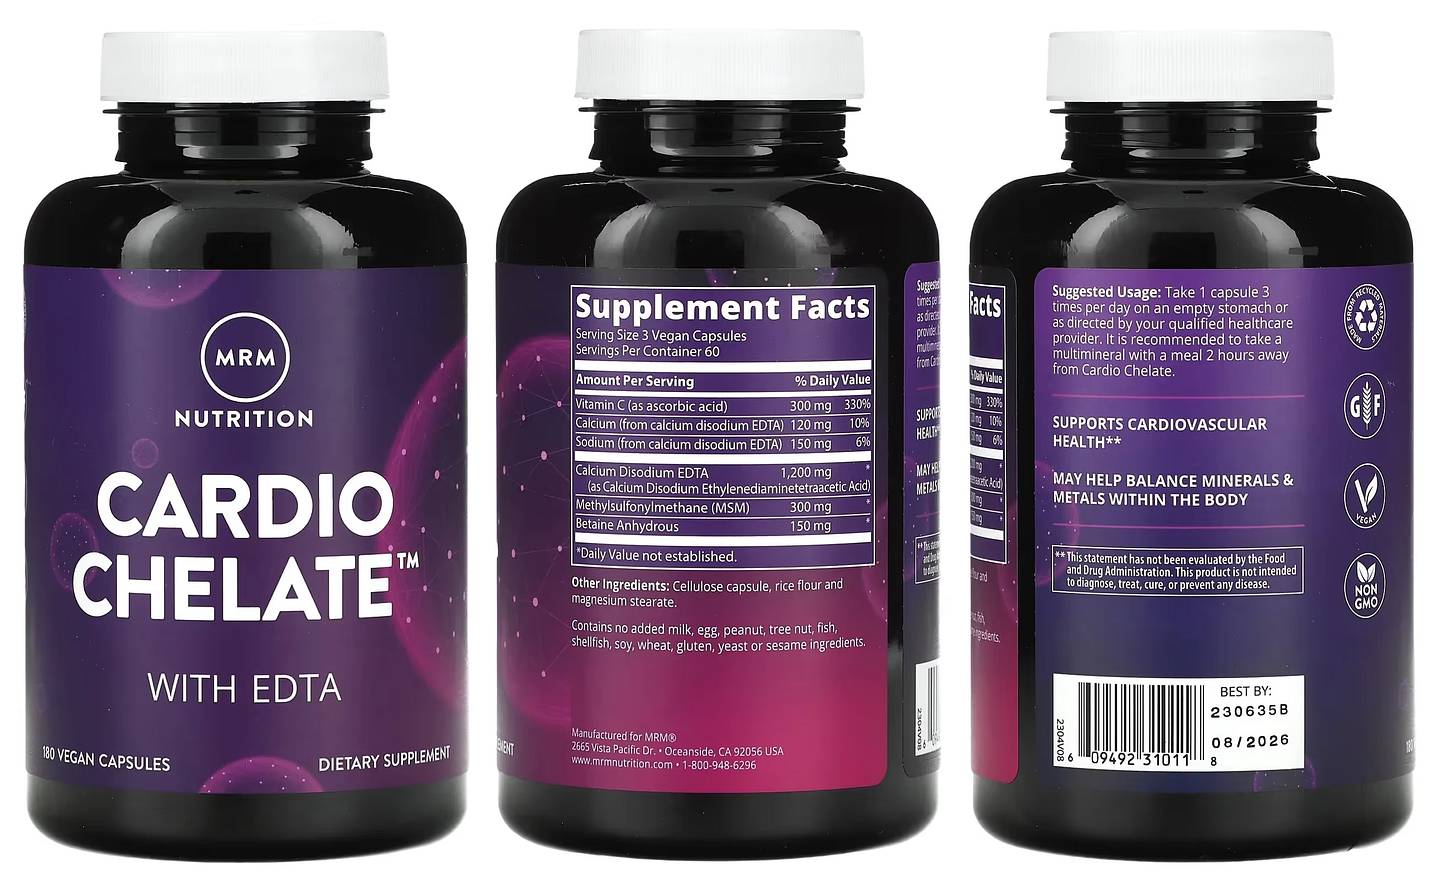 MRM Nutrition, Cardio Chelate with EDTA packaging